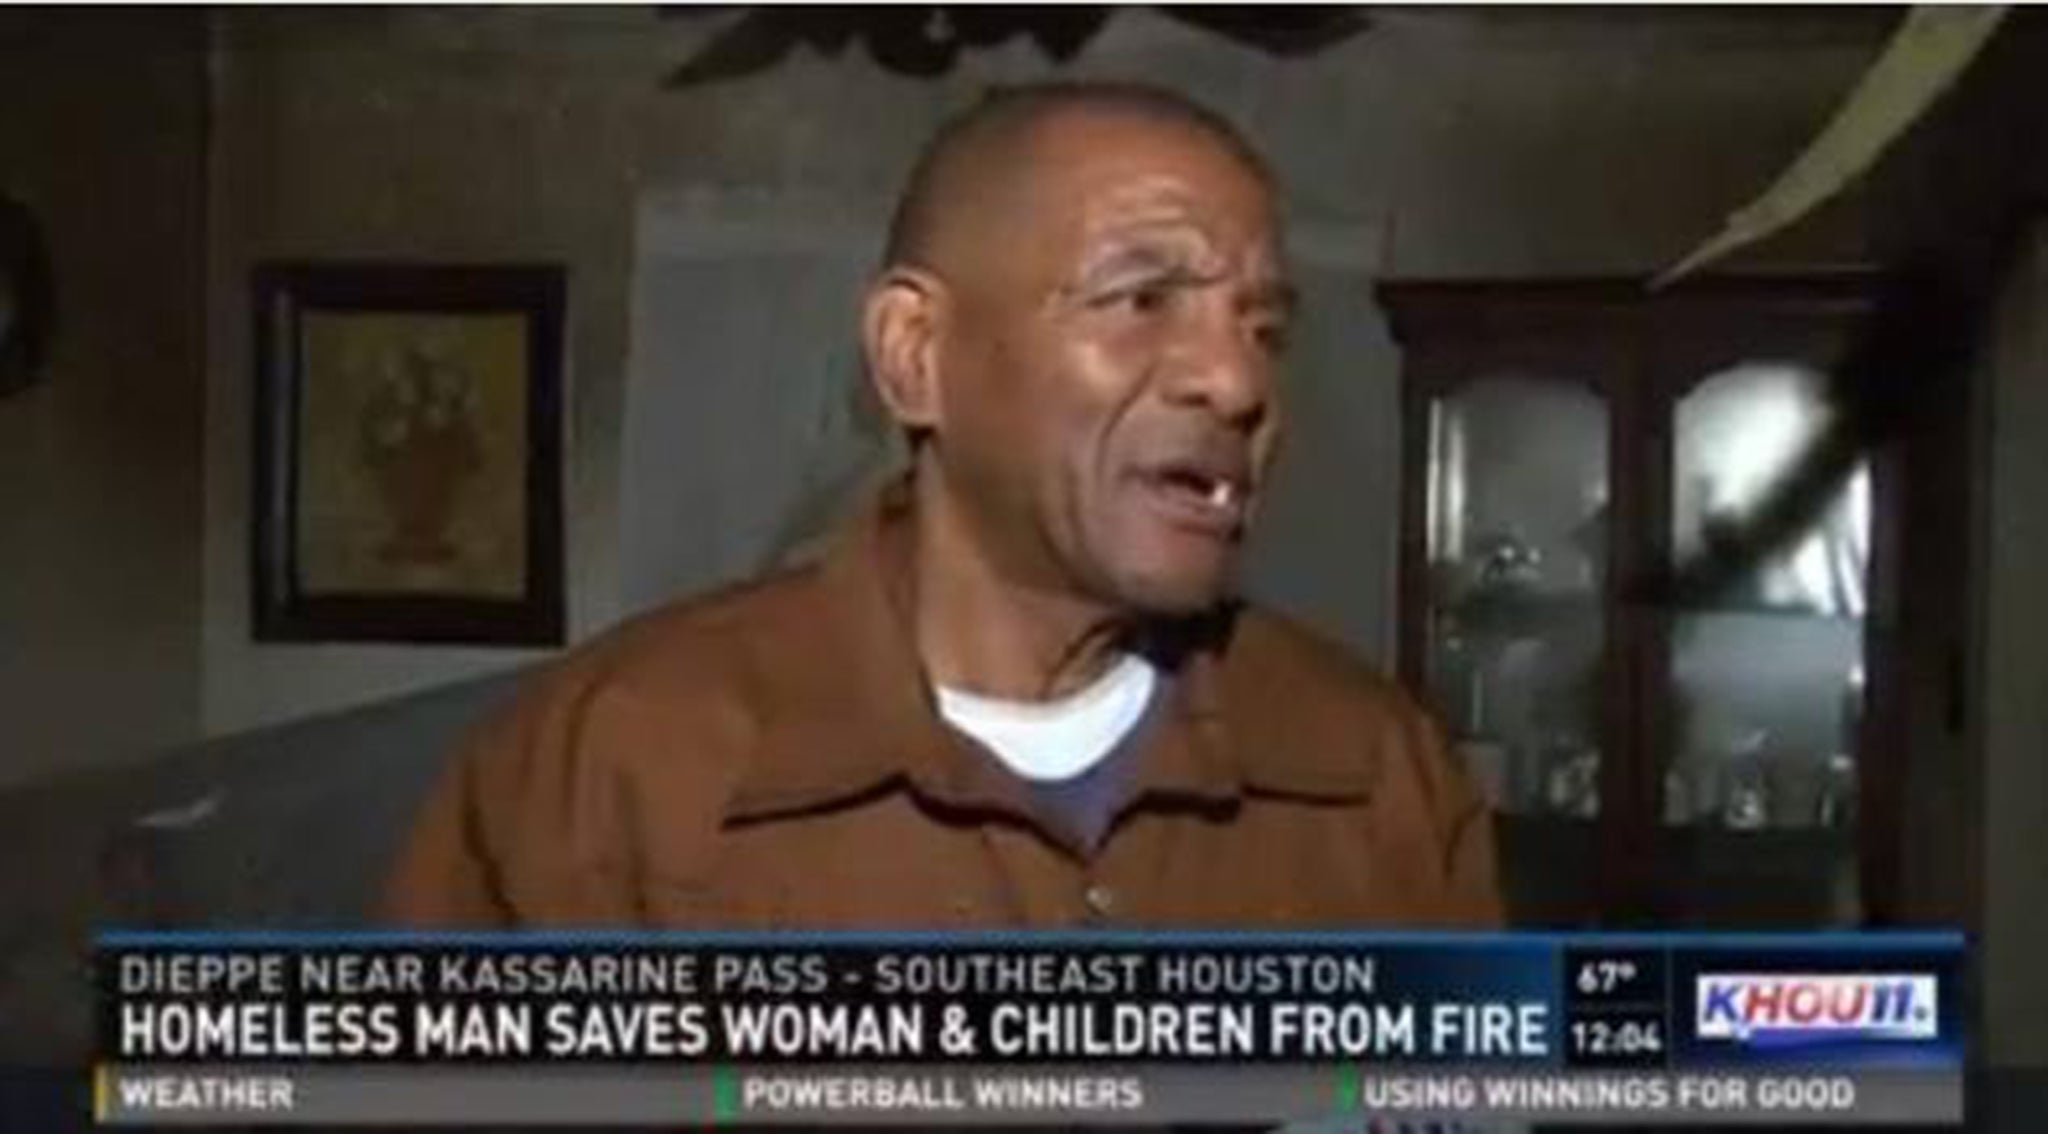 Thomas Smith is credited with saving three lives during a fire at a home in Houston